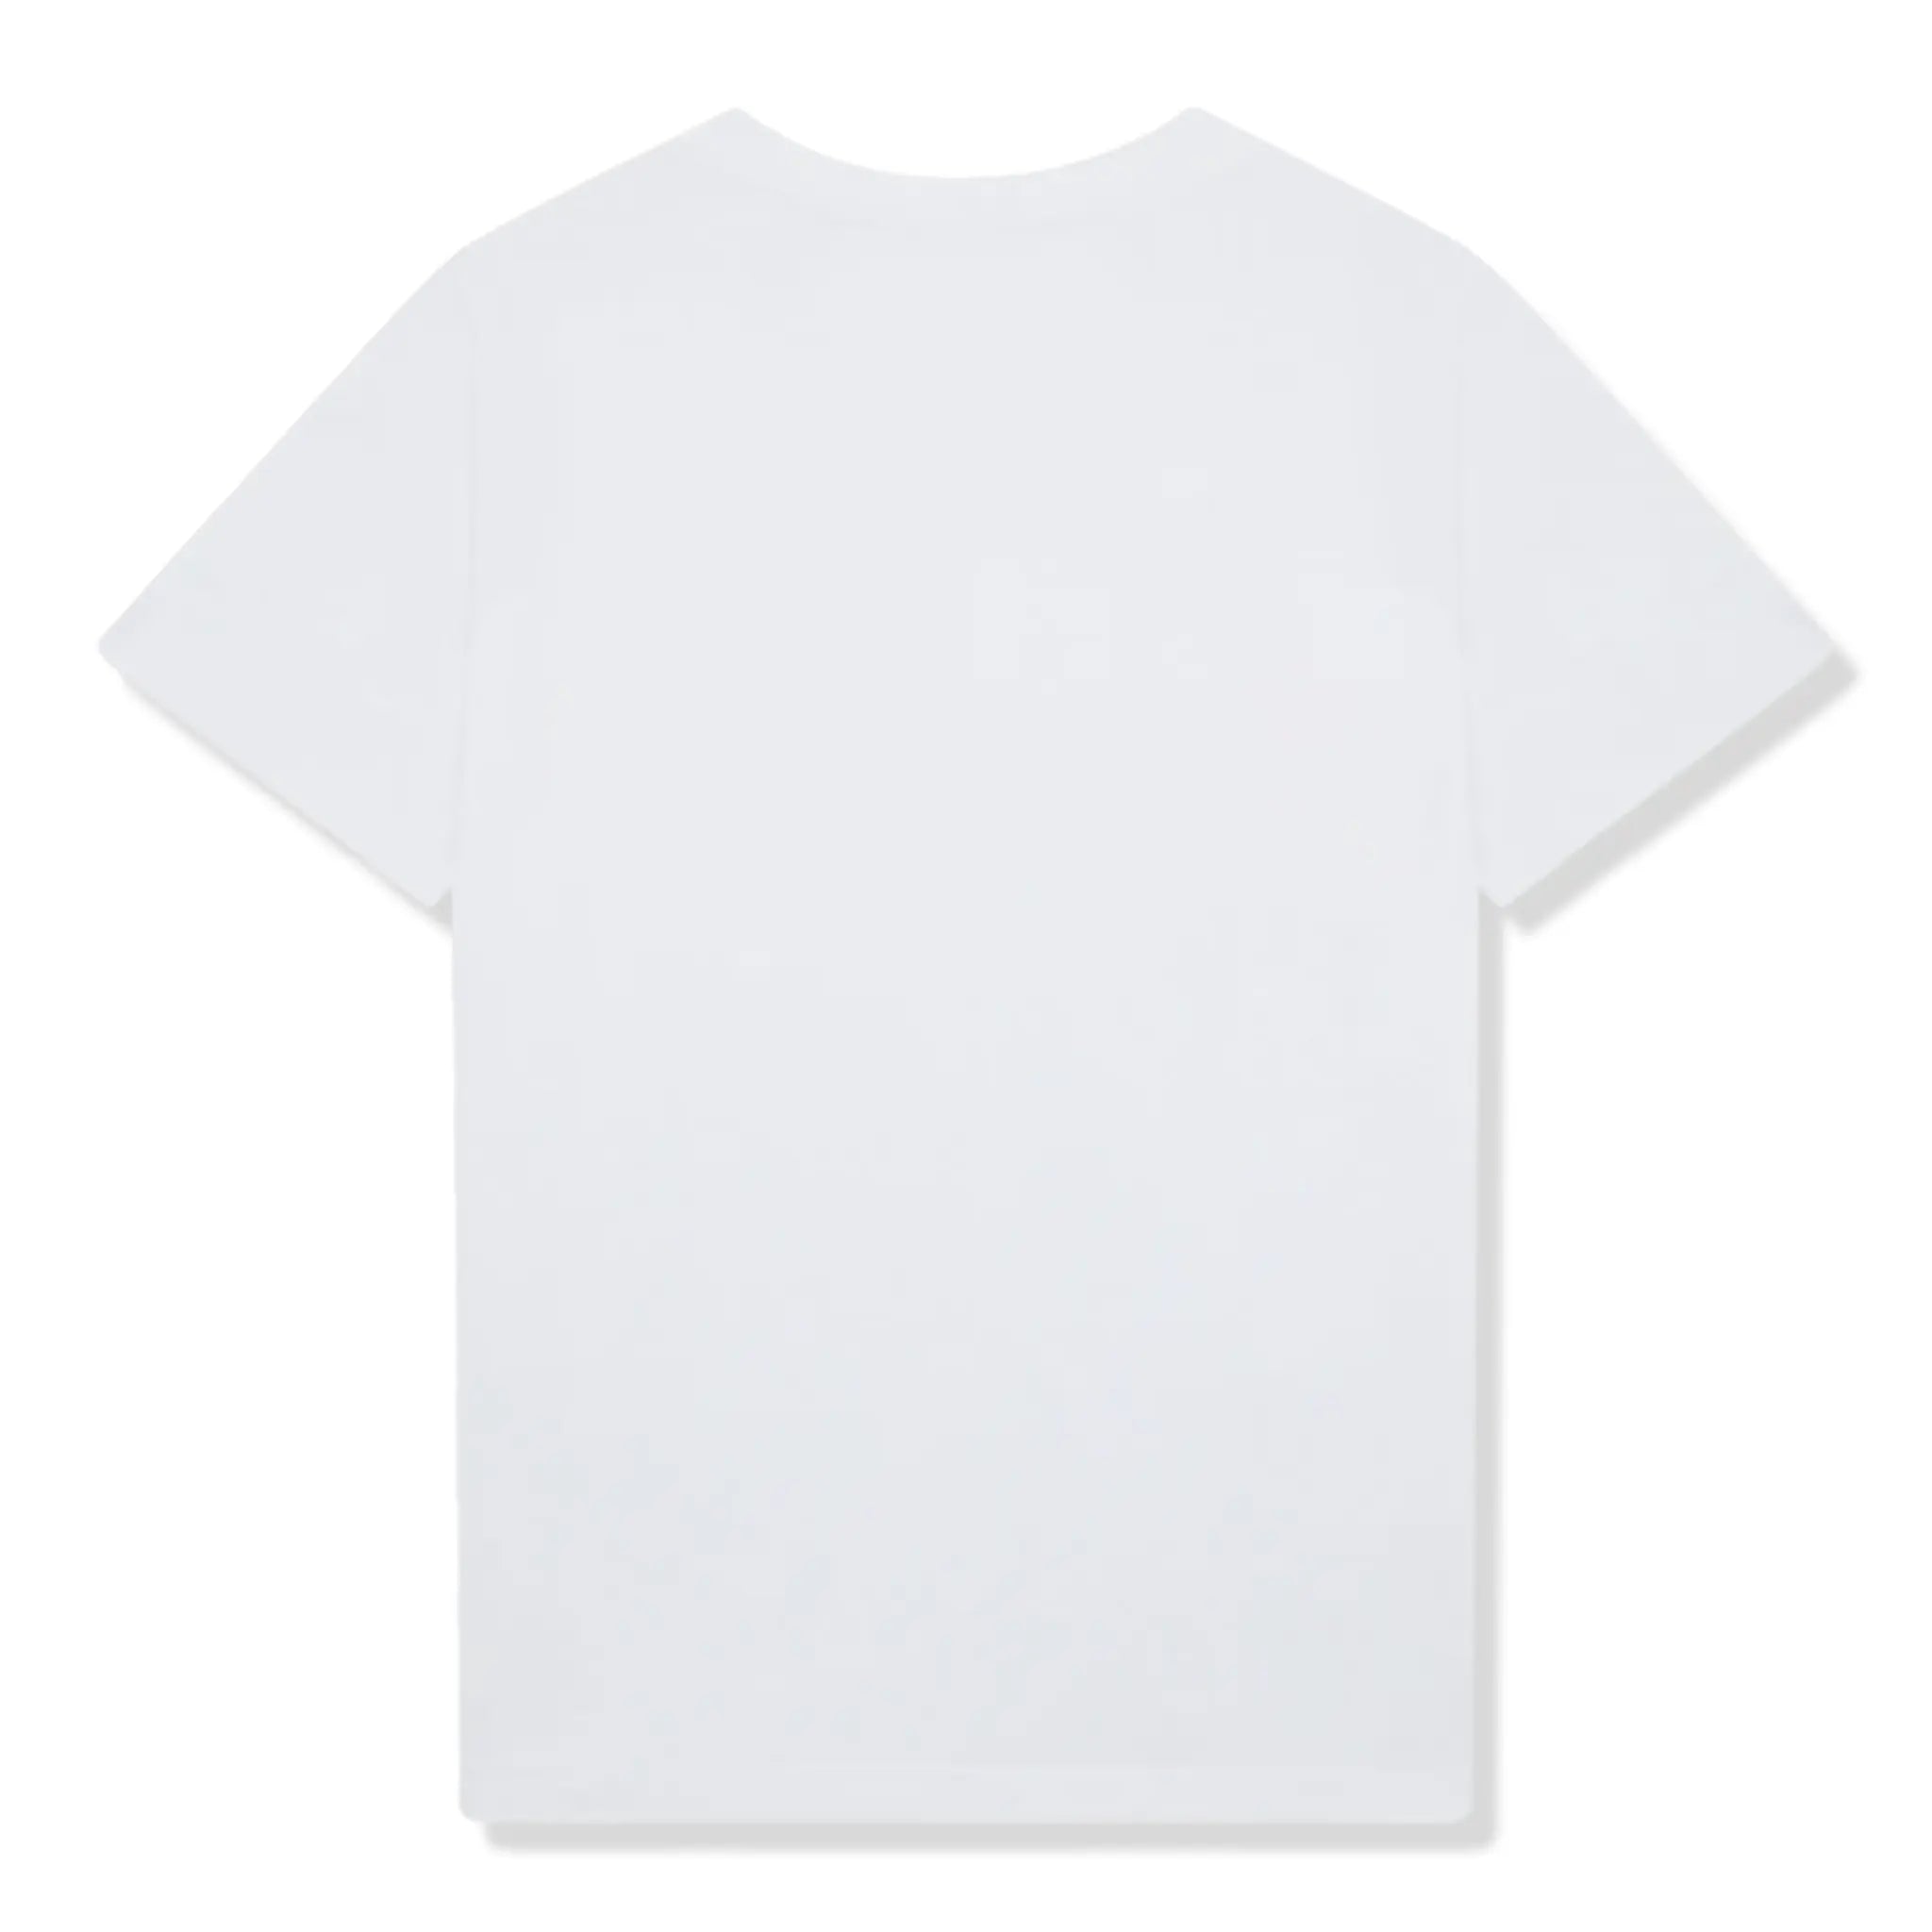 Back view of Casablanca Playful Eagle White T Shirt MS24JTS00120